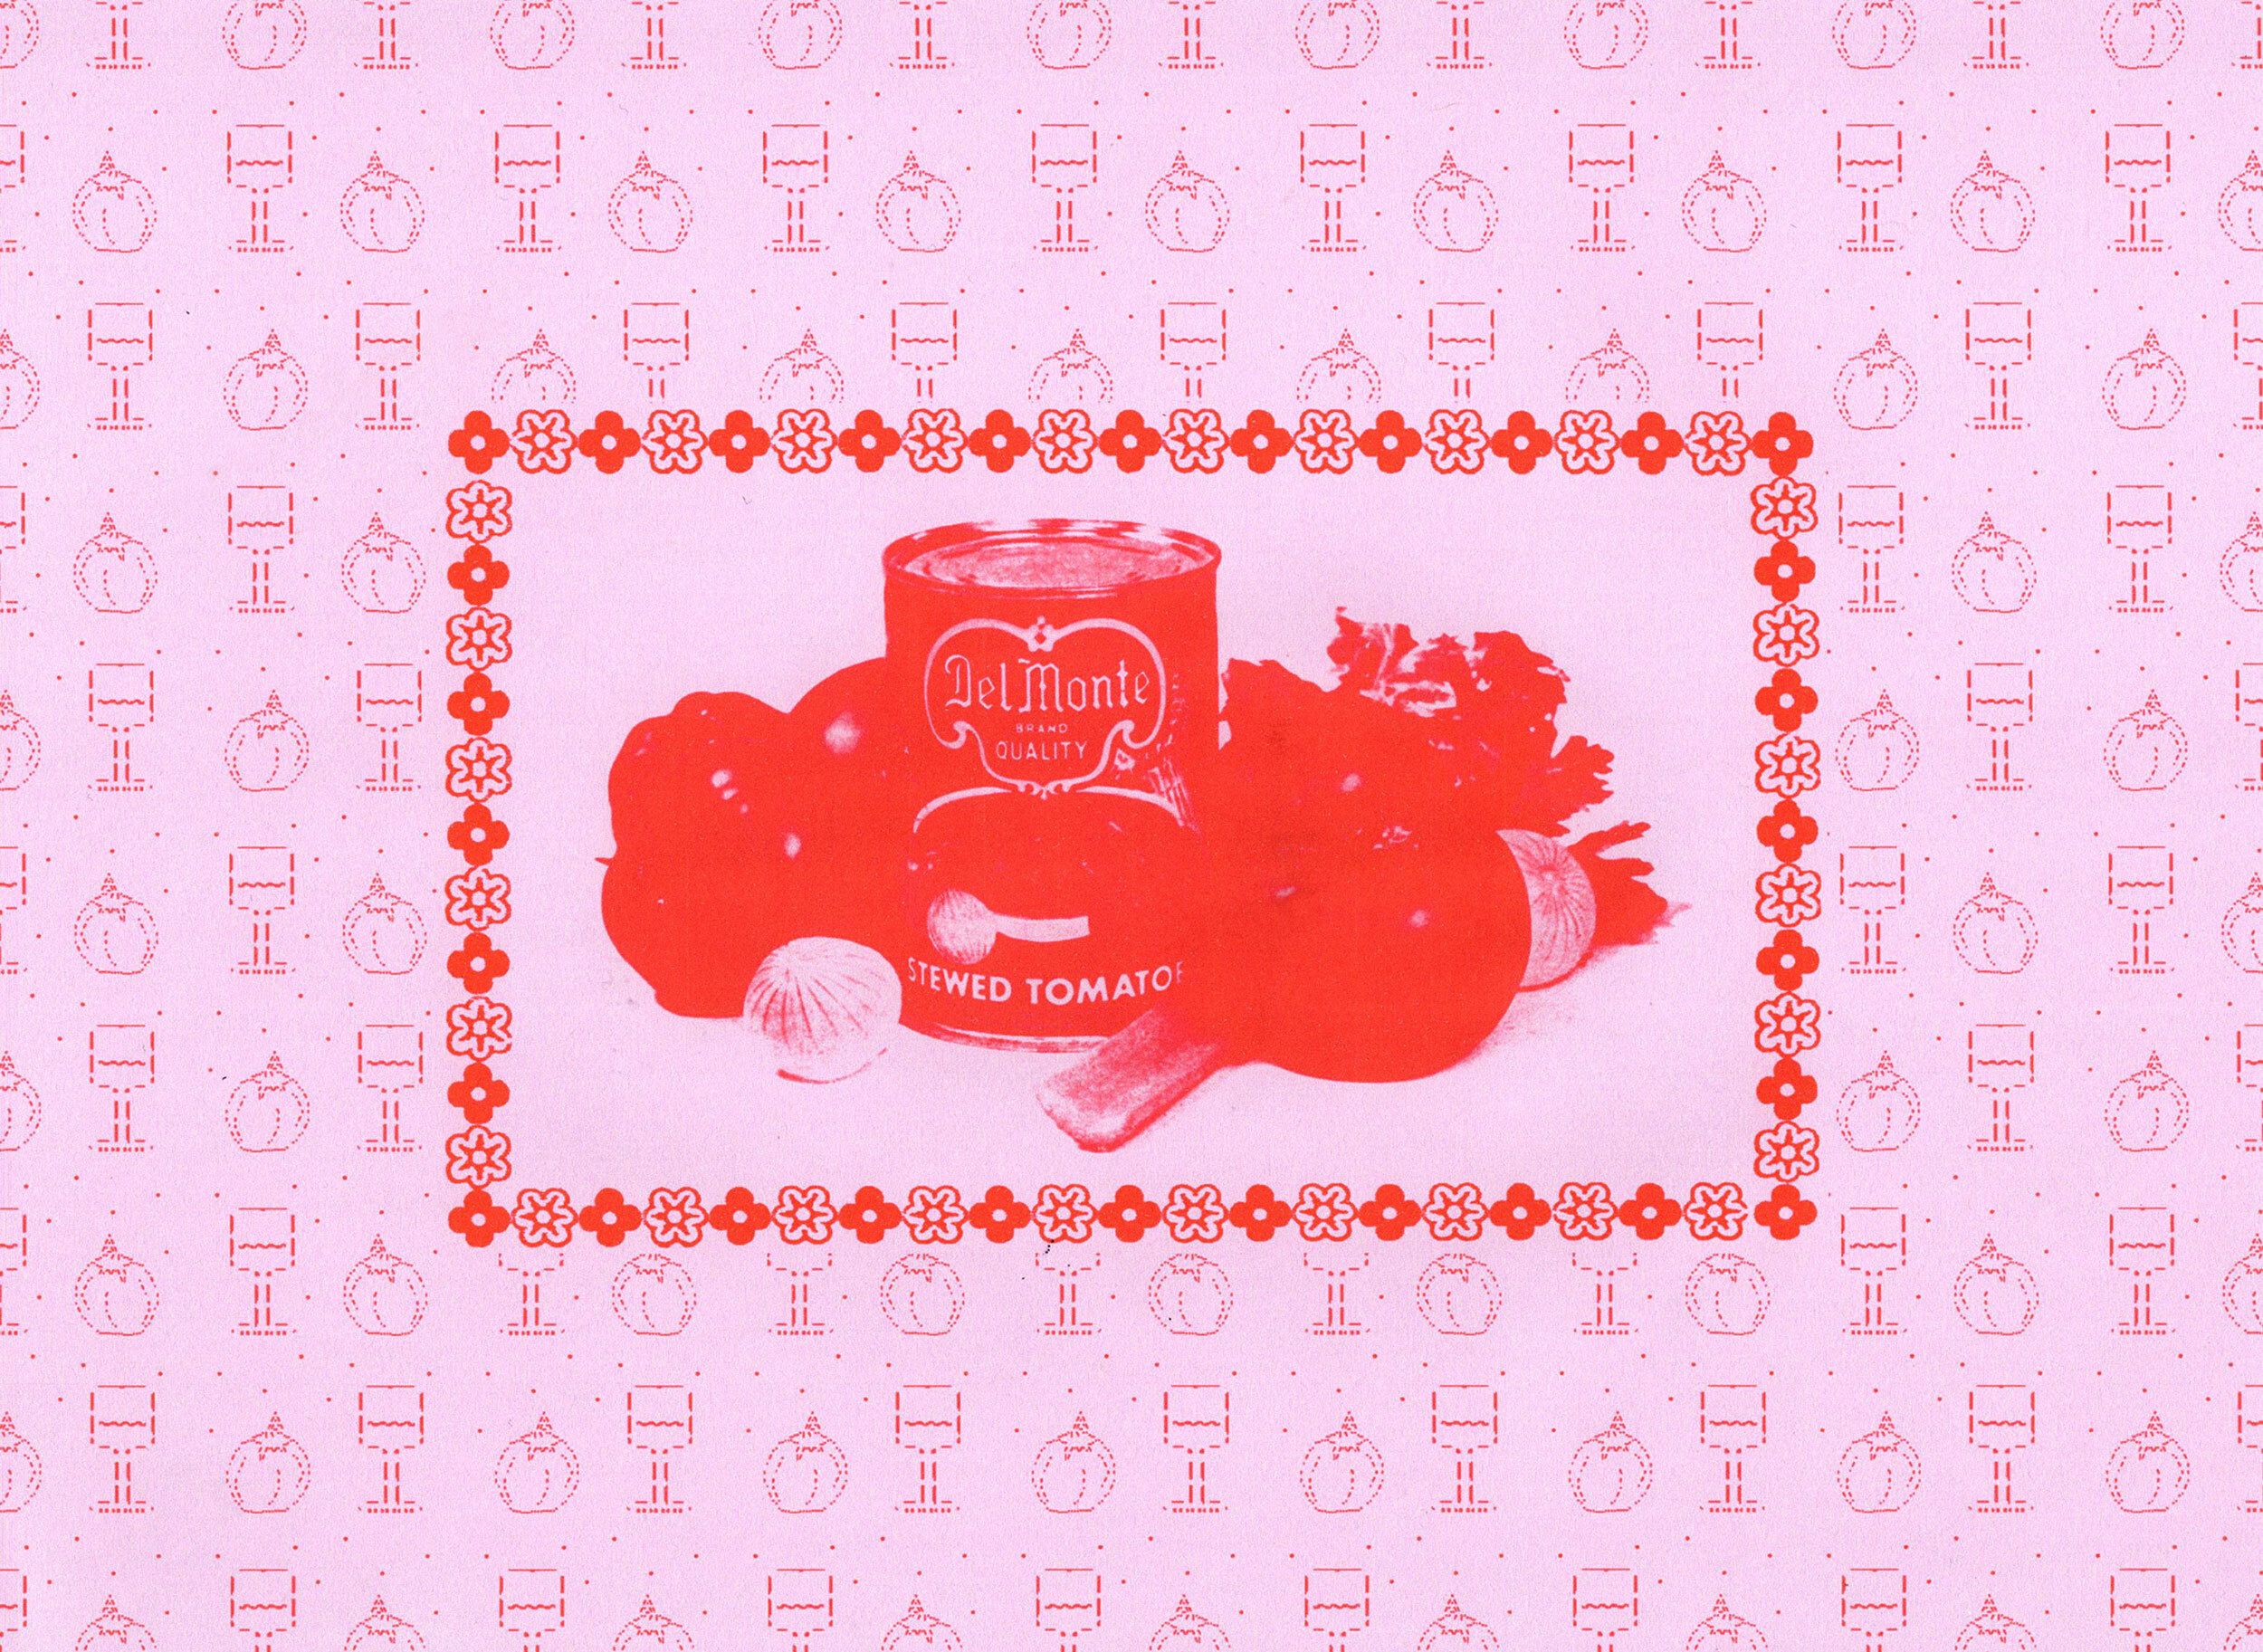 A pink background with a red monochrome illustration of Tomato sauce.